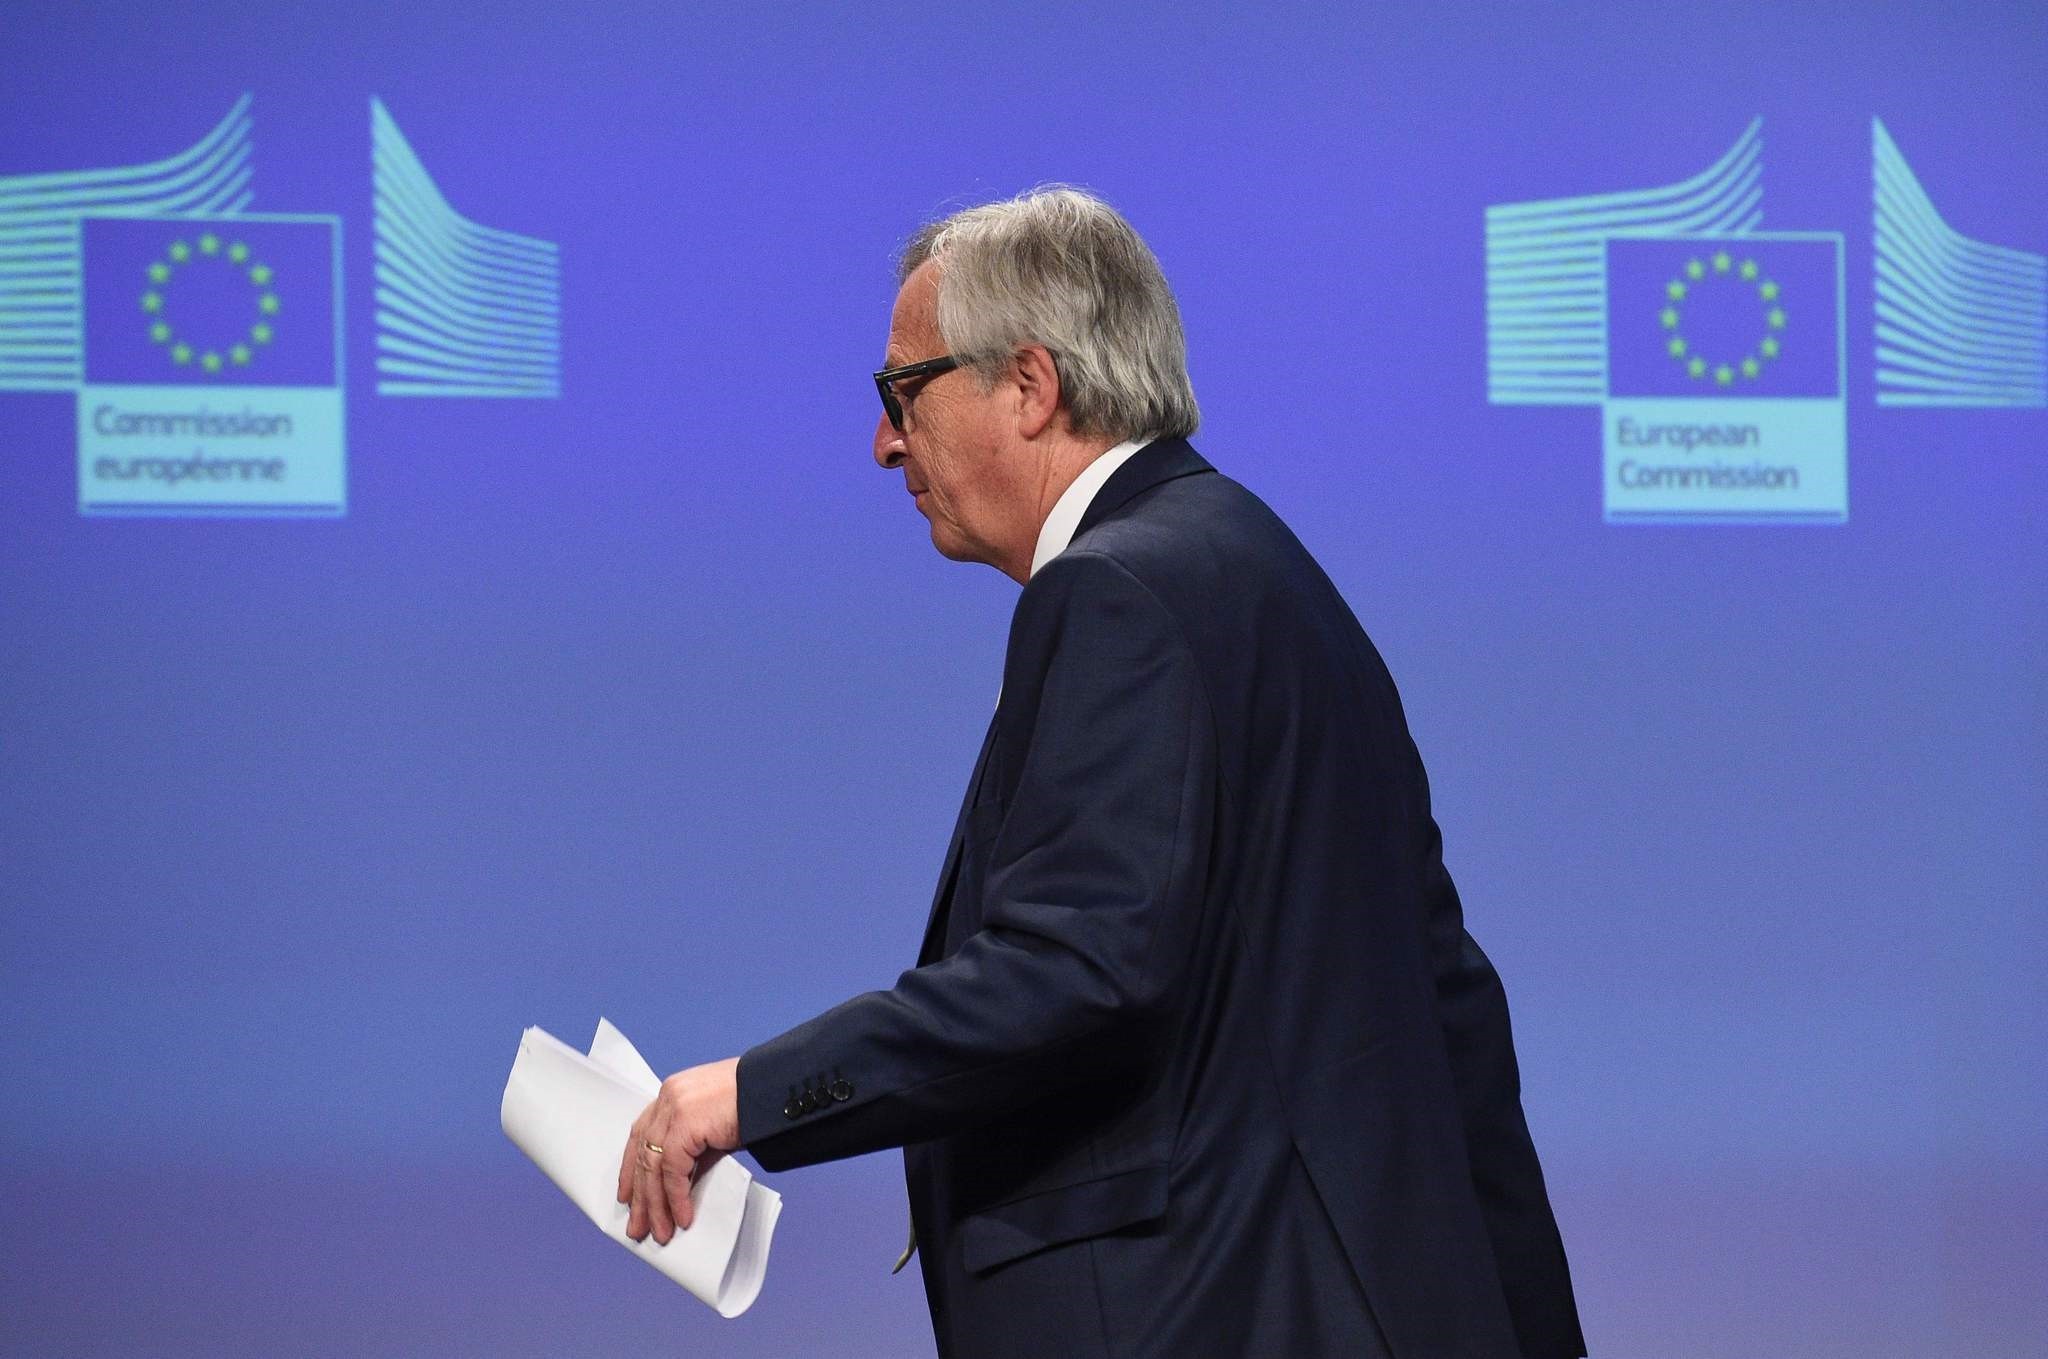 European Commission chief Jean-Claude Juncker leaves after a joint press conference  at the EU Headquarters in Brussels on June 24, 2016. (AFP Photo)